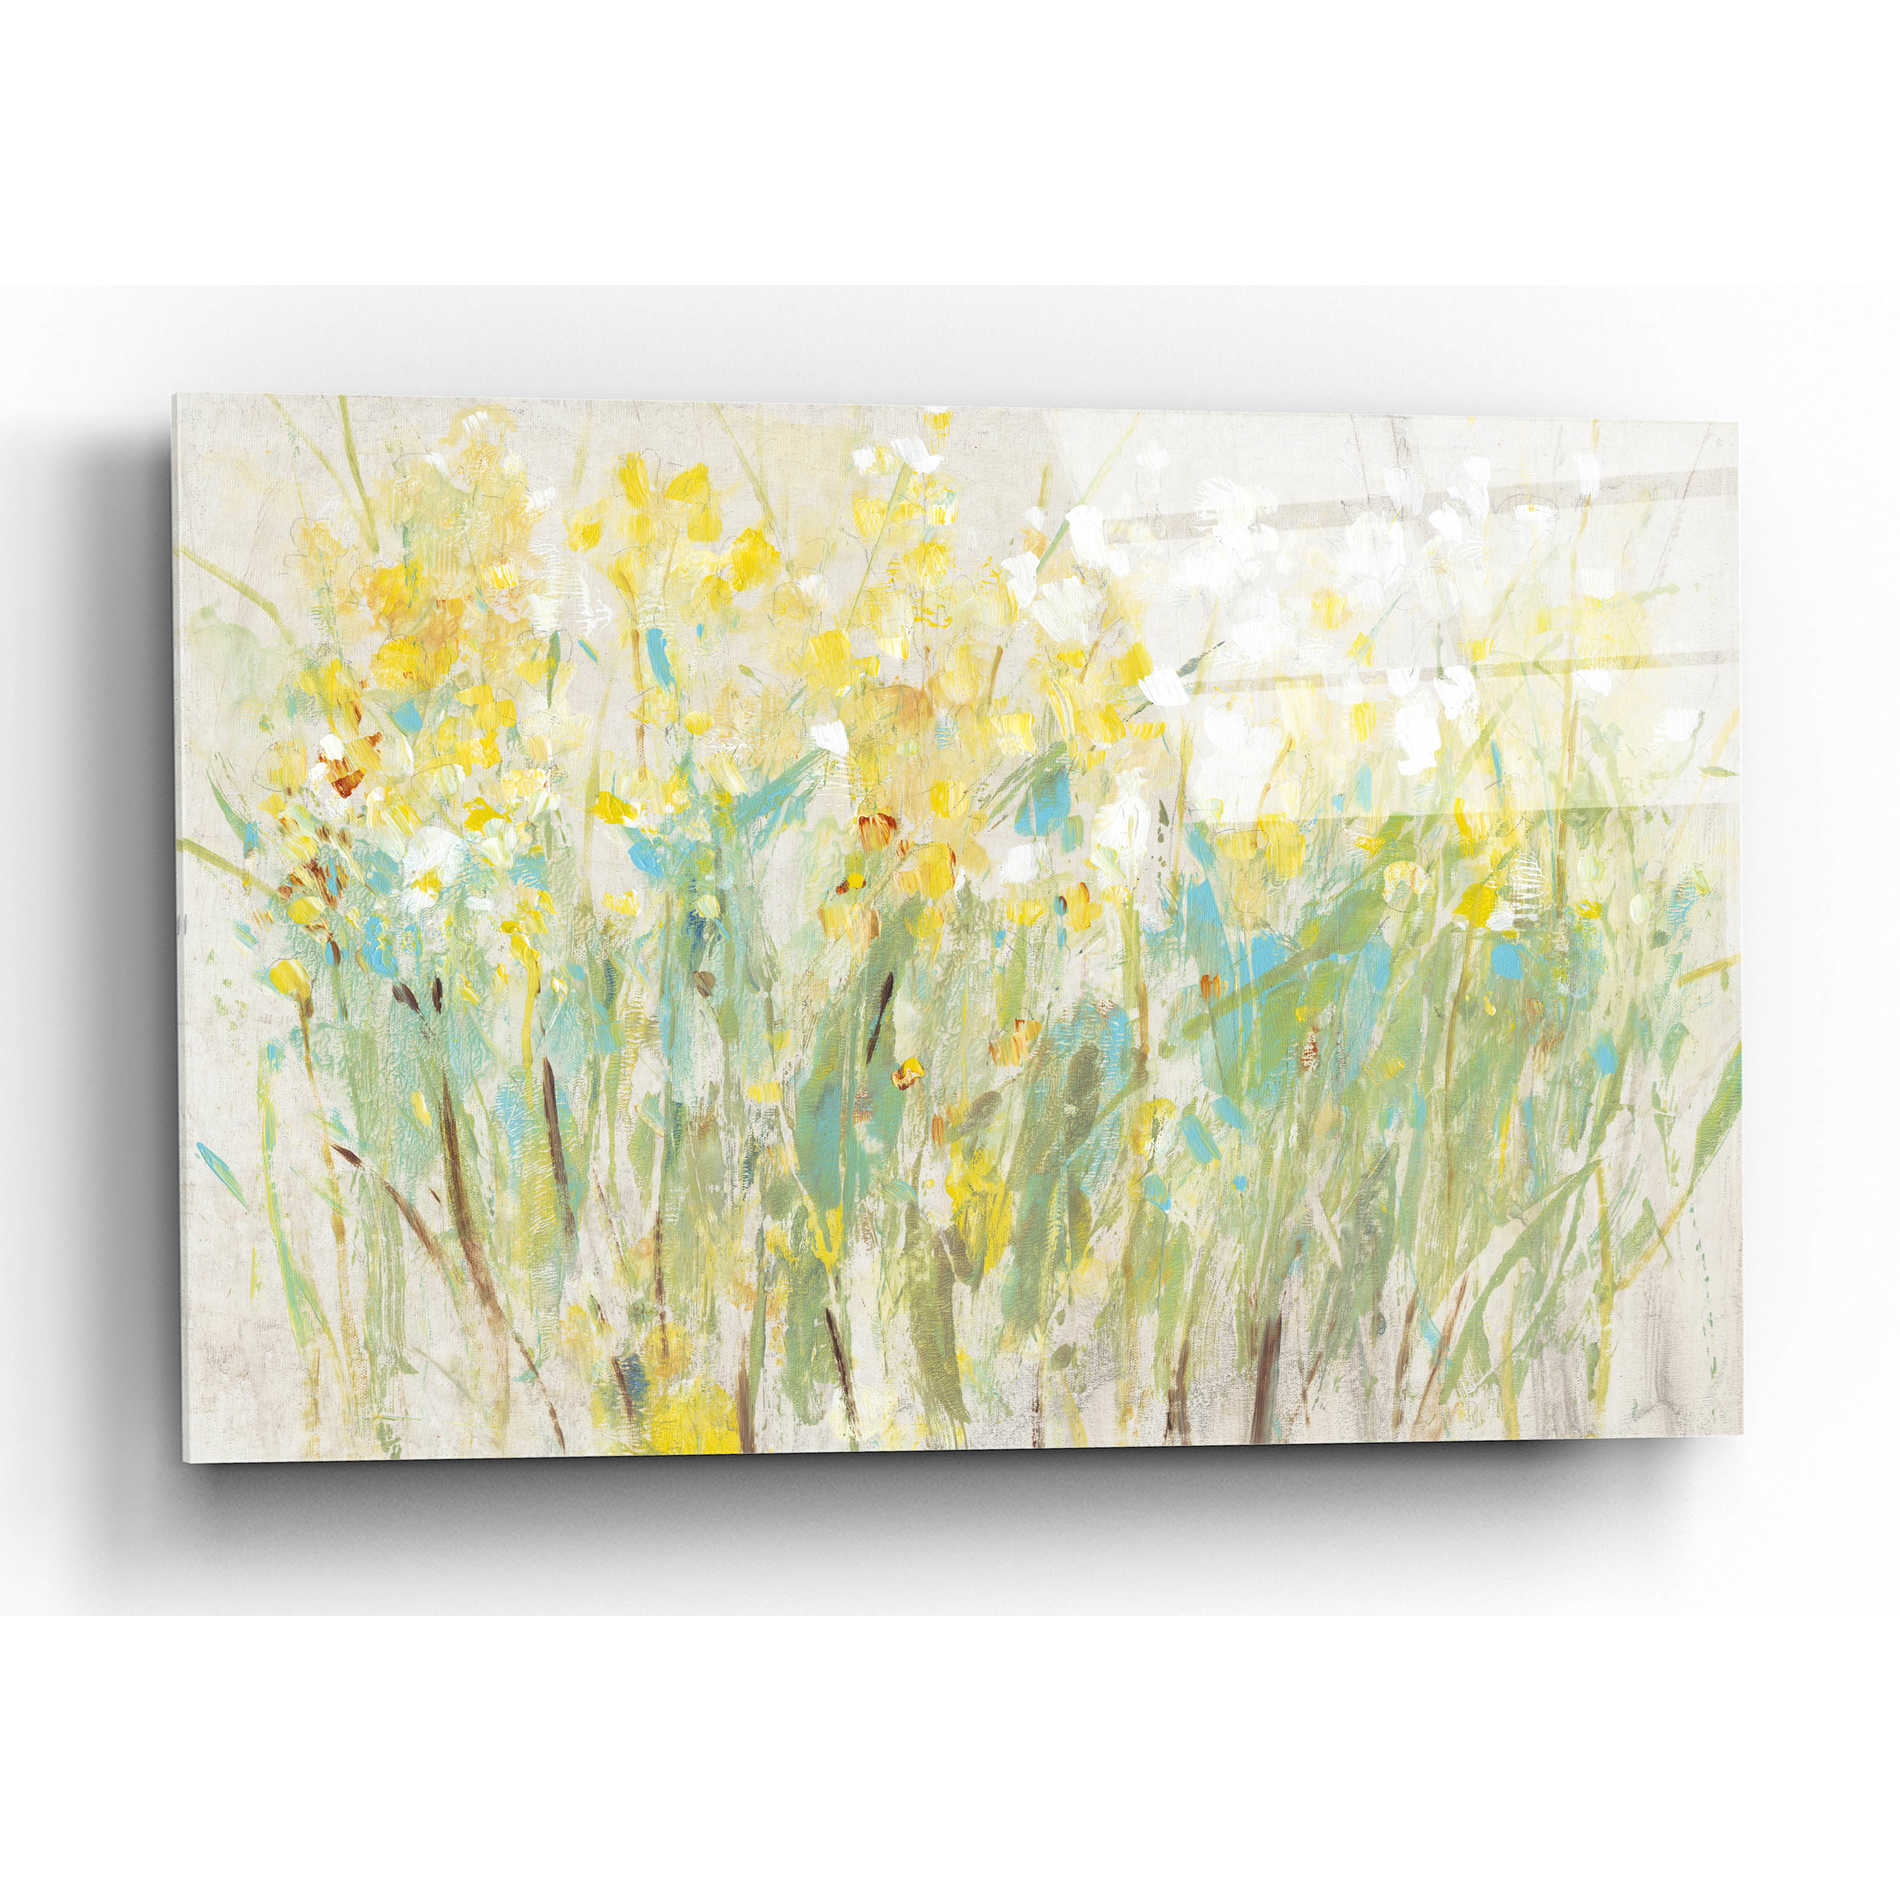 Epic Art 'Floral Cluster II' by Tim O'Toole, Acrylic Glass Wall Art,16x12